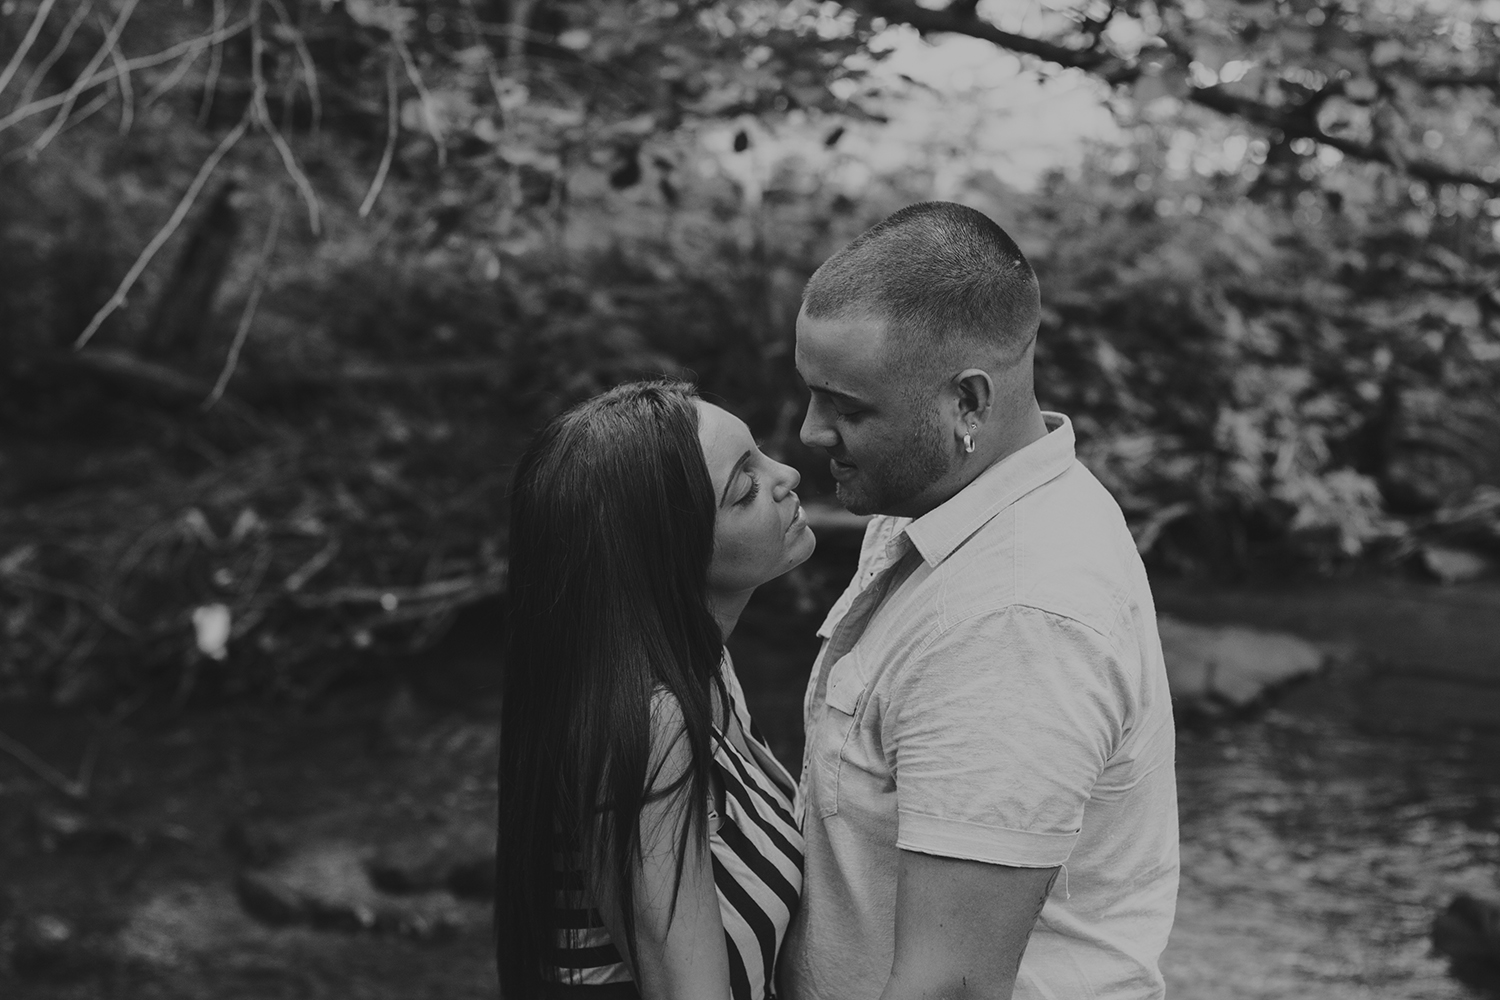  Outdoor engagement photography at Corbett's Glen Nature Park in Rochester, NY. 